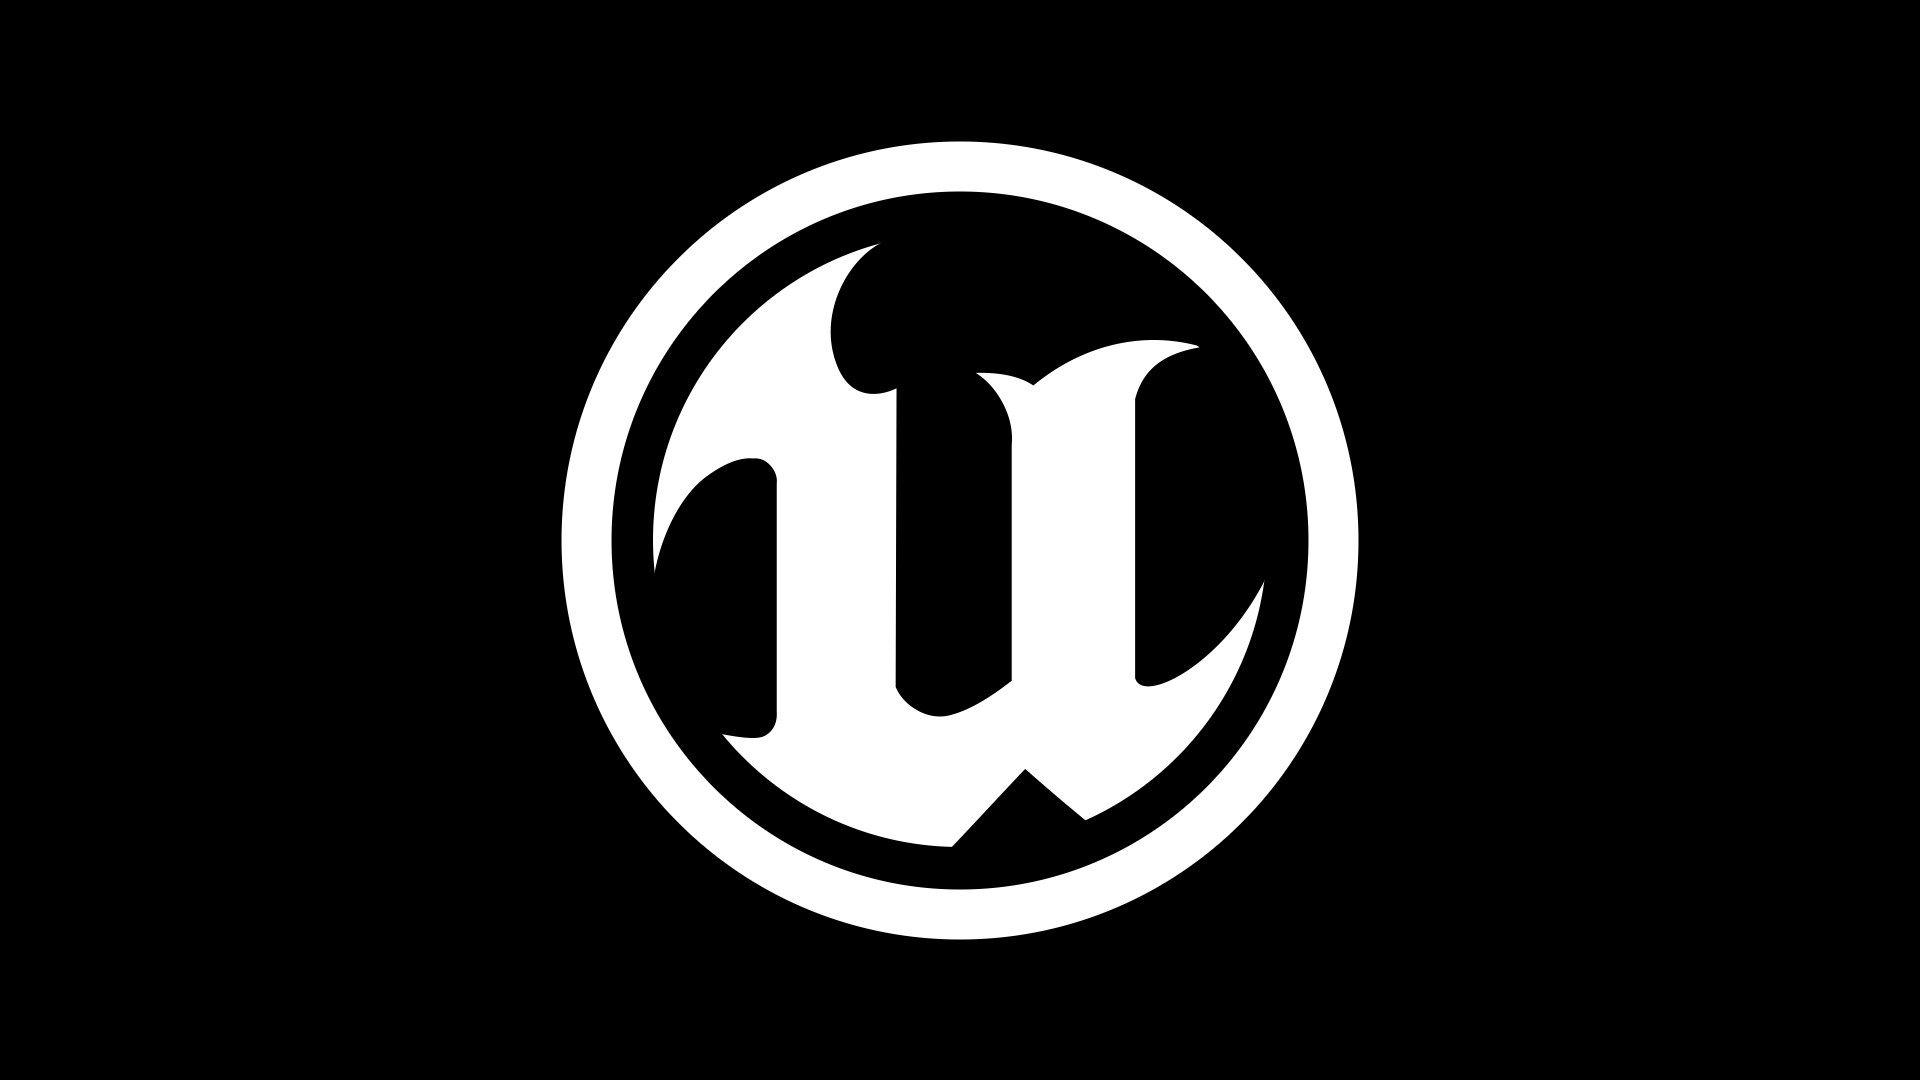 Unreal Logo - SUPER.COM Invests $50 Million on Unreal Engine Projects